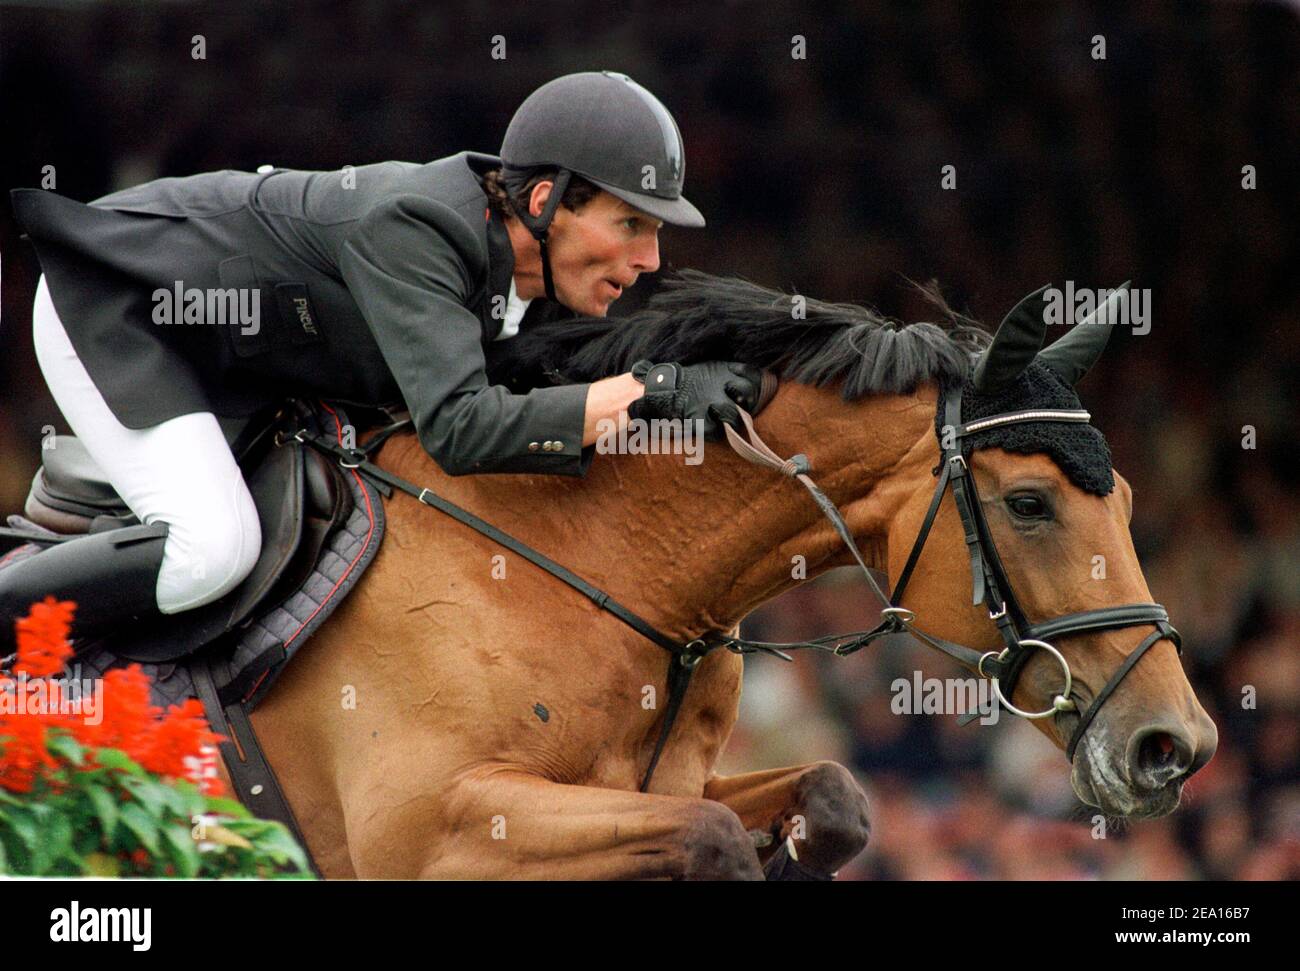 Aachen Germany 20.06.1999, Equestrian: CHIO Aachen - Ludger BEERBAUM (GER) on Ratina Z Stock Photo